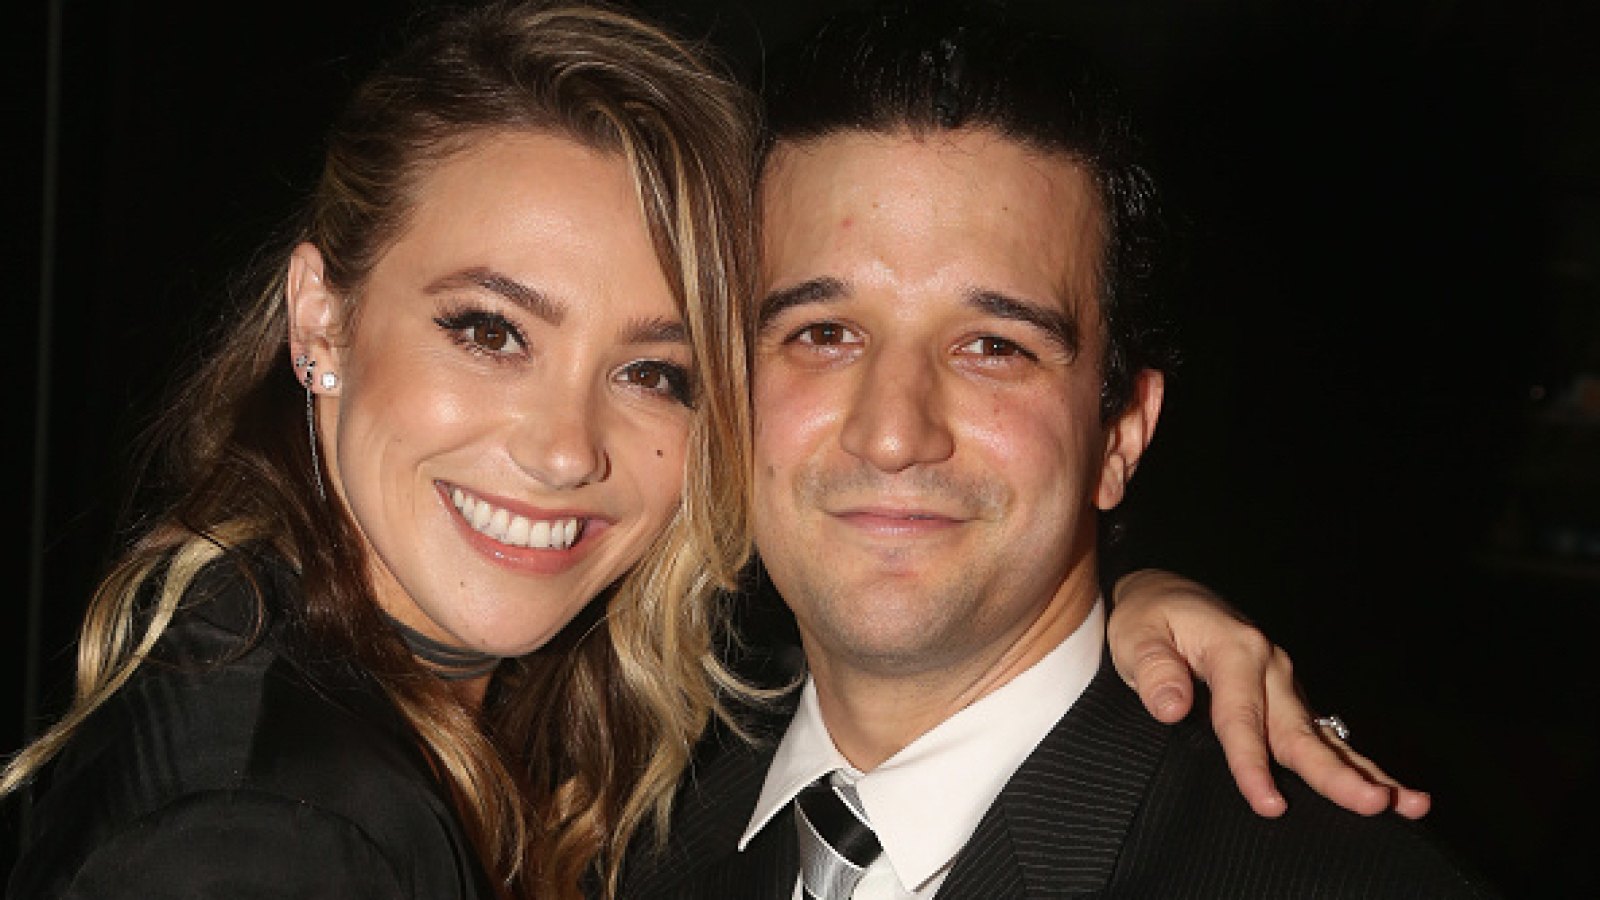 Mark Ballas and BC Jean married on November 25